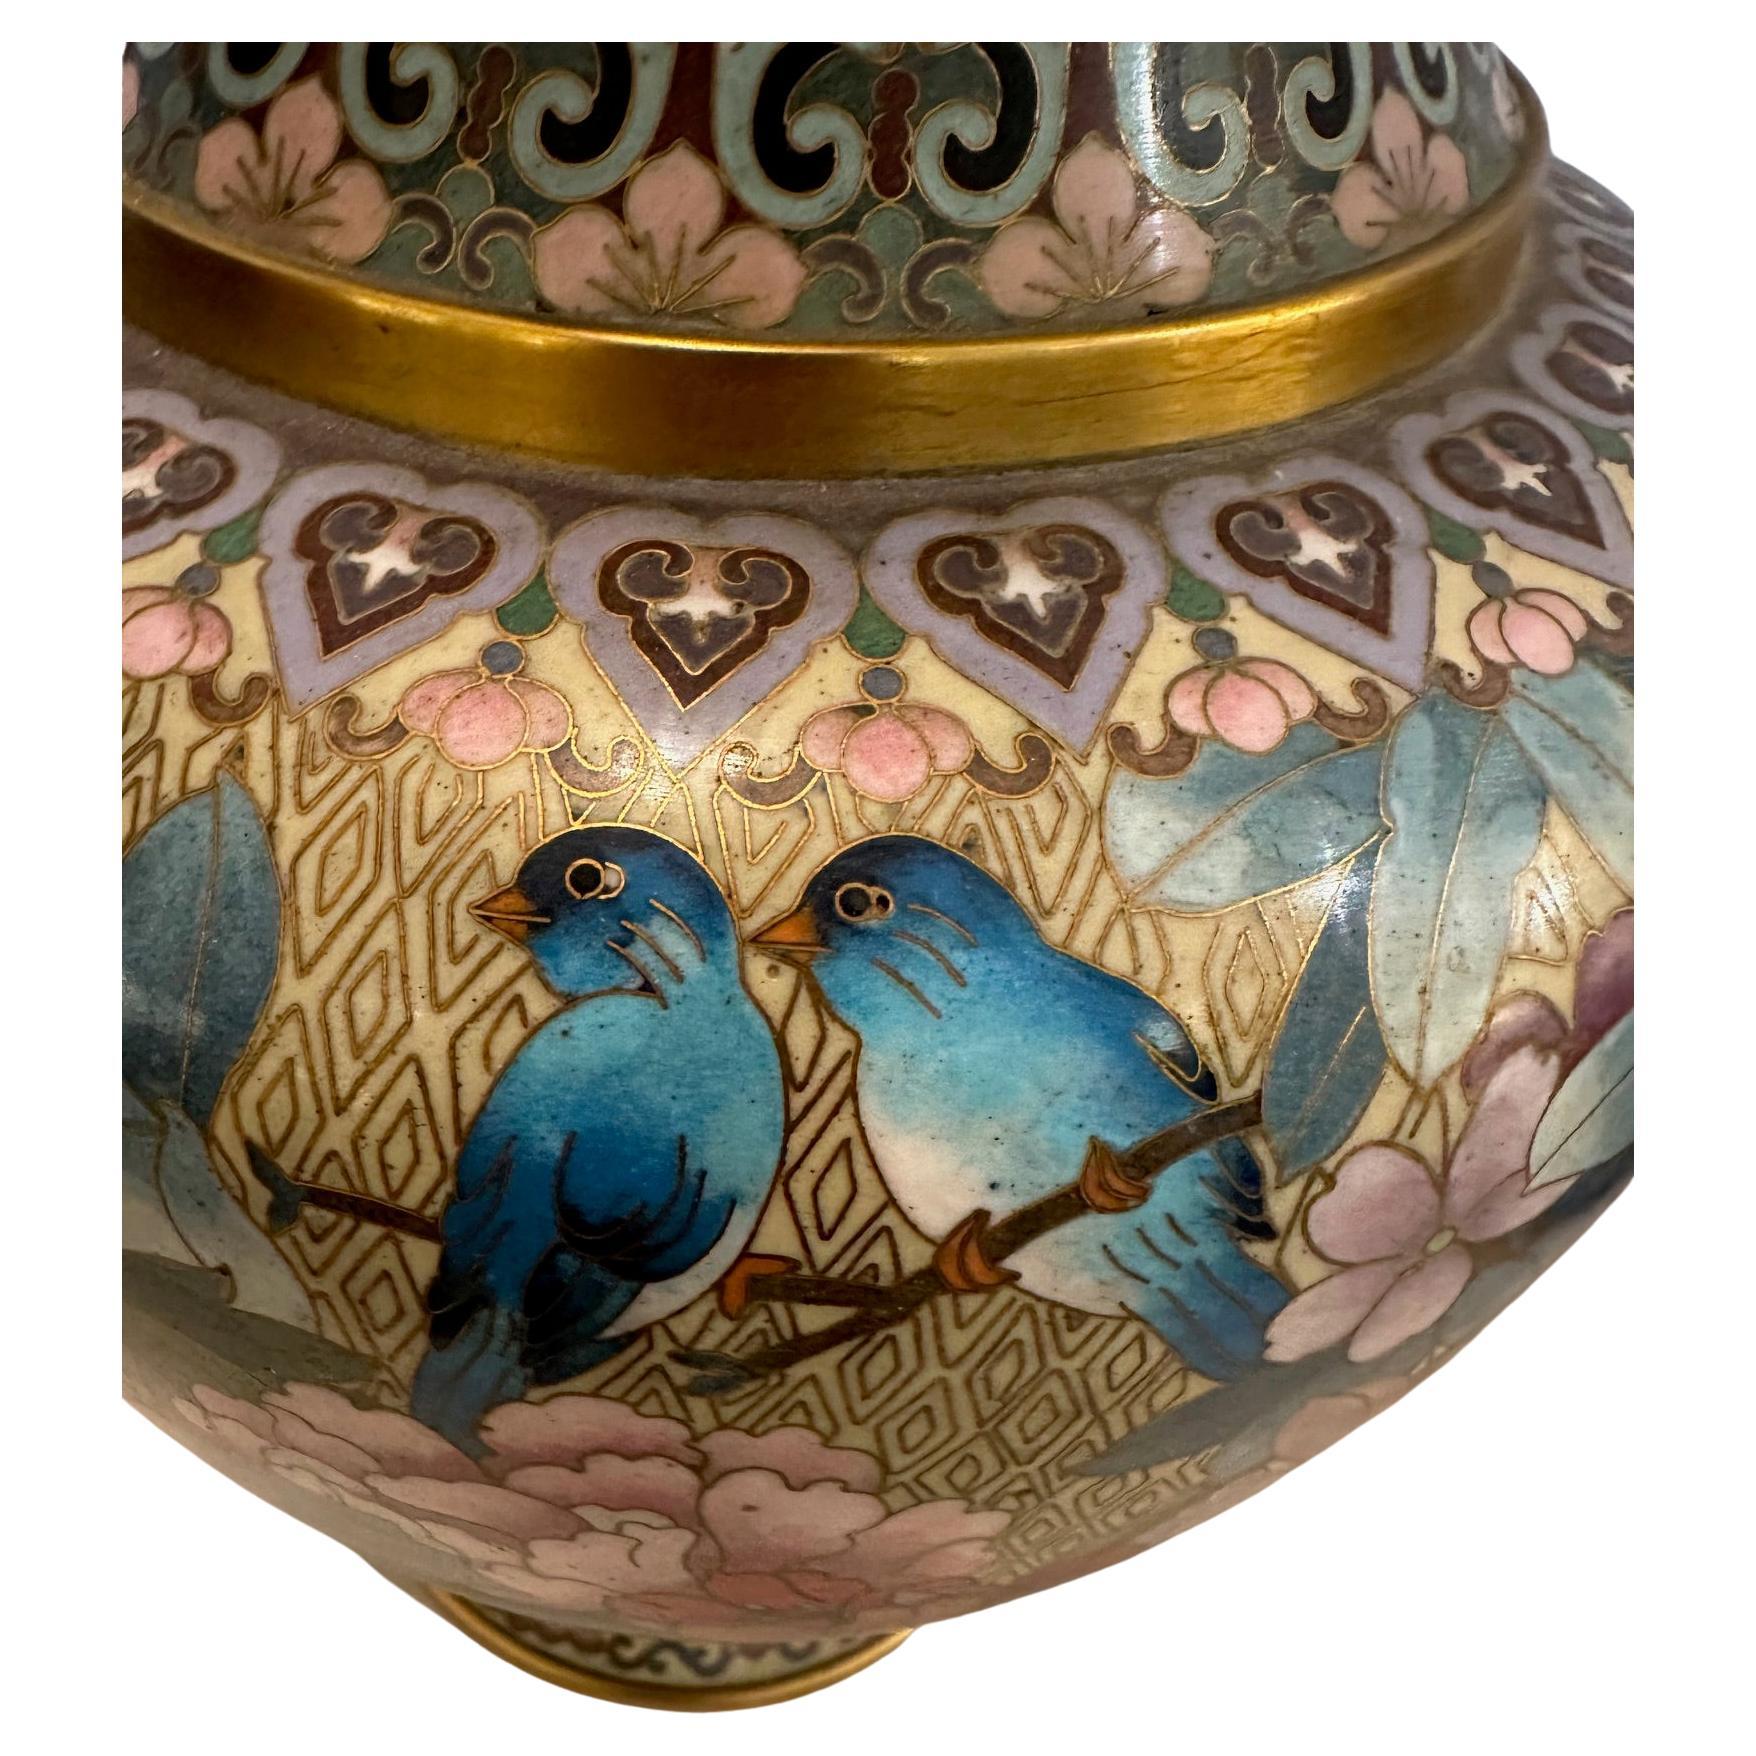 Pair of lovely Chinese gilded enamel on bronze Cloisonne vases
adorned with Cherry Blossoms,  Peonies and Blue birds.
